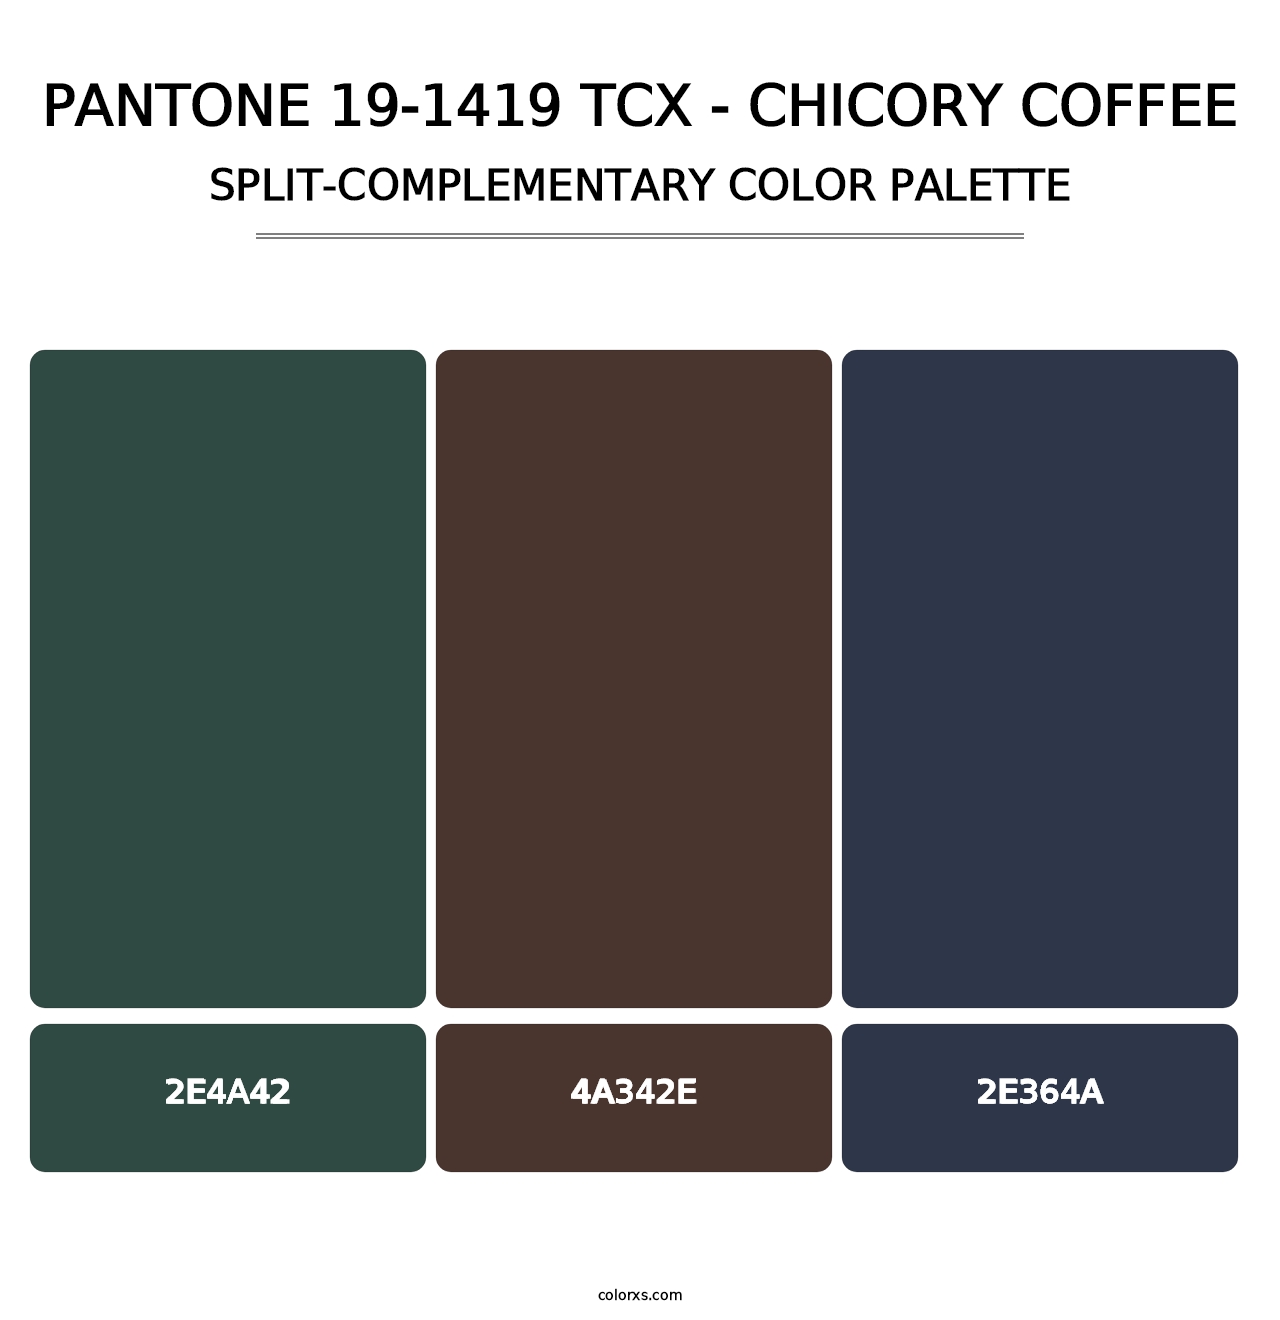 PANTONE 19-1419 TCX - Chicory Coffee - Split-Complementary Color Palette